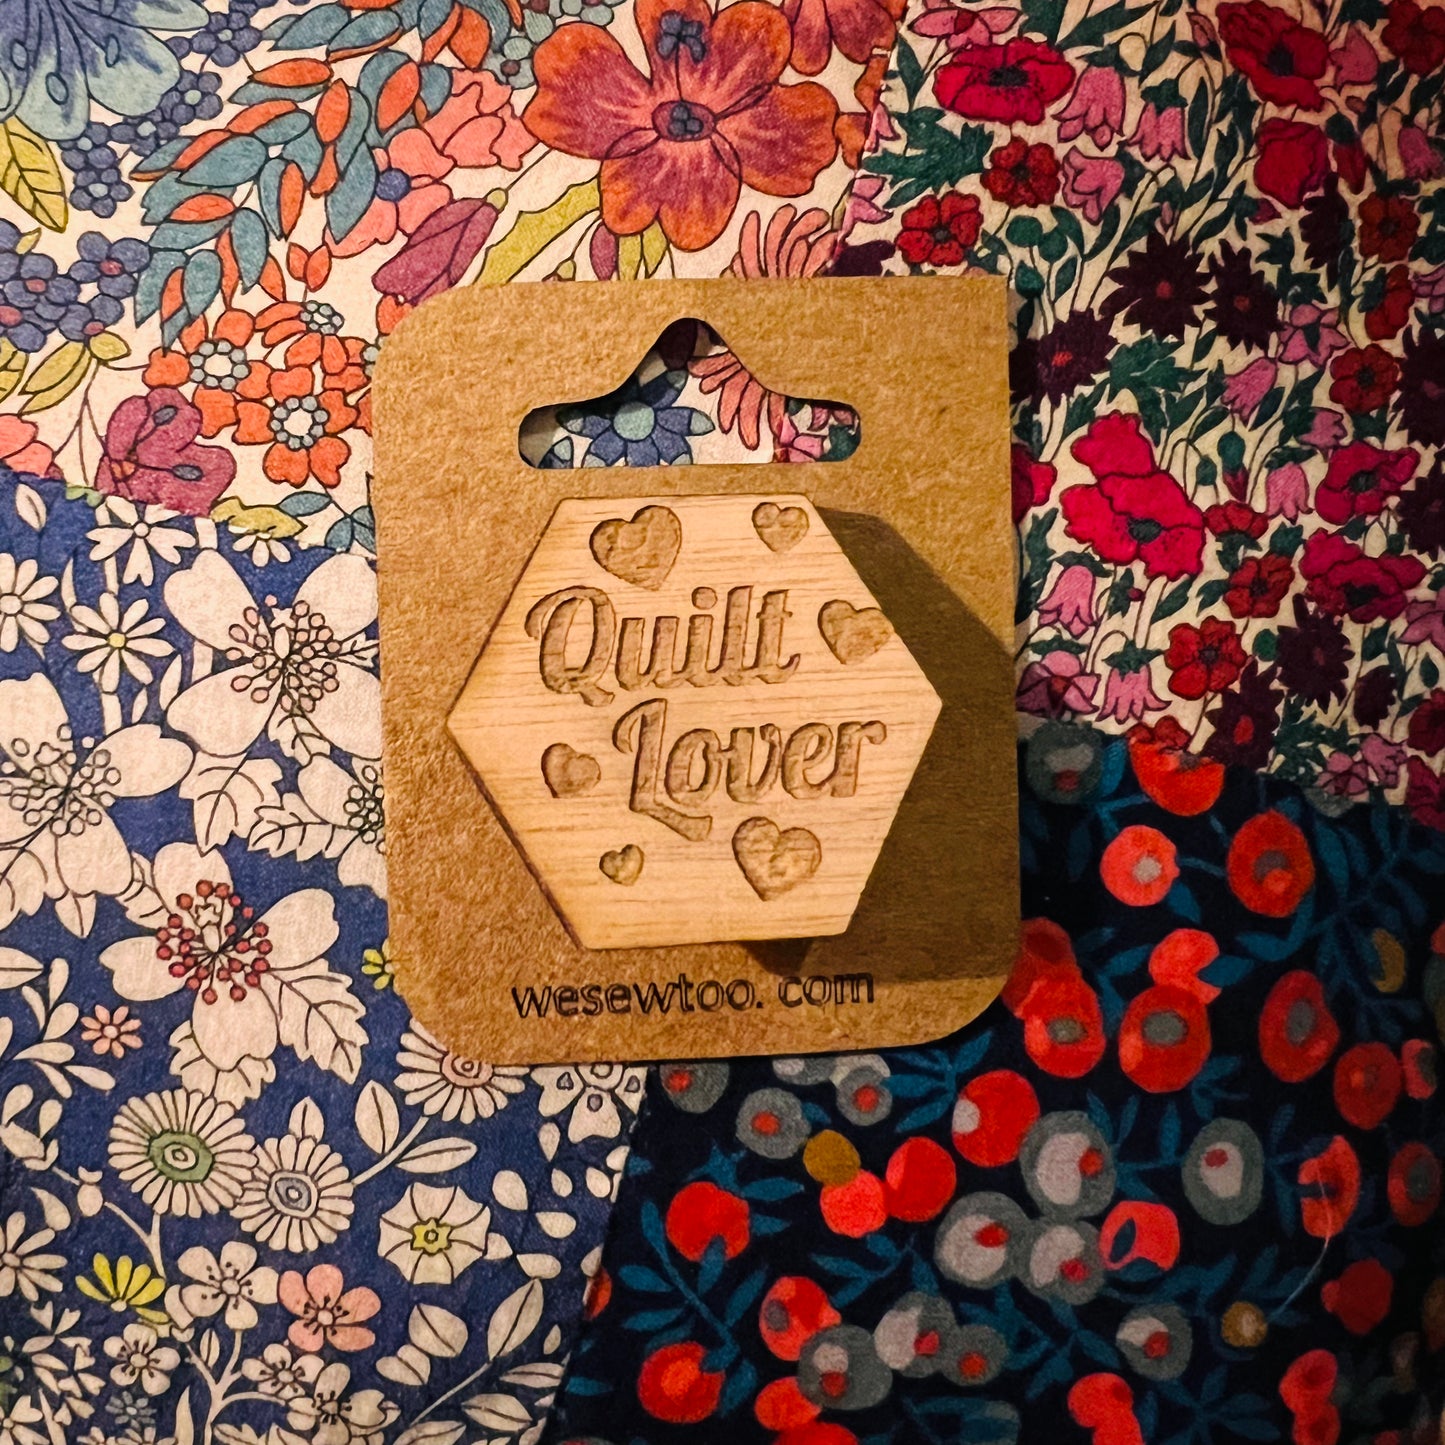 Quilt Lover Pin Badge